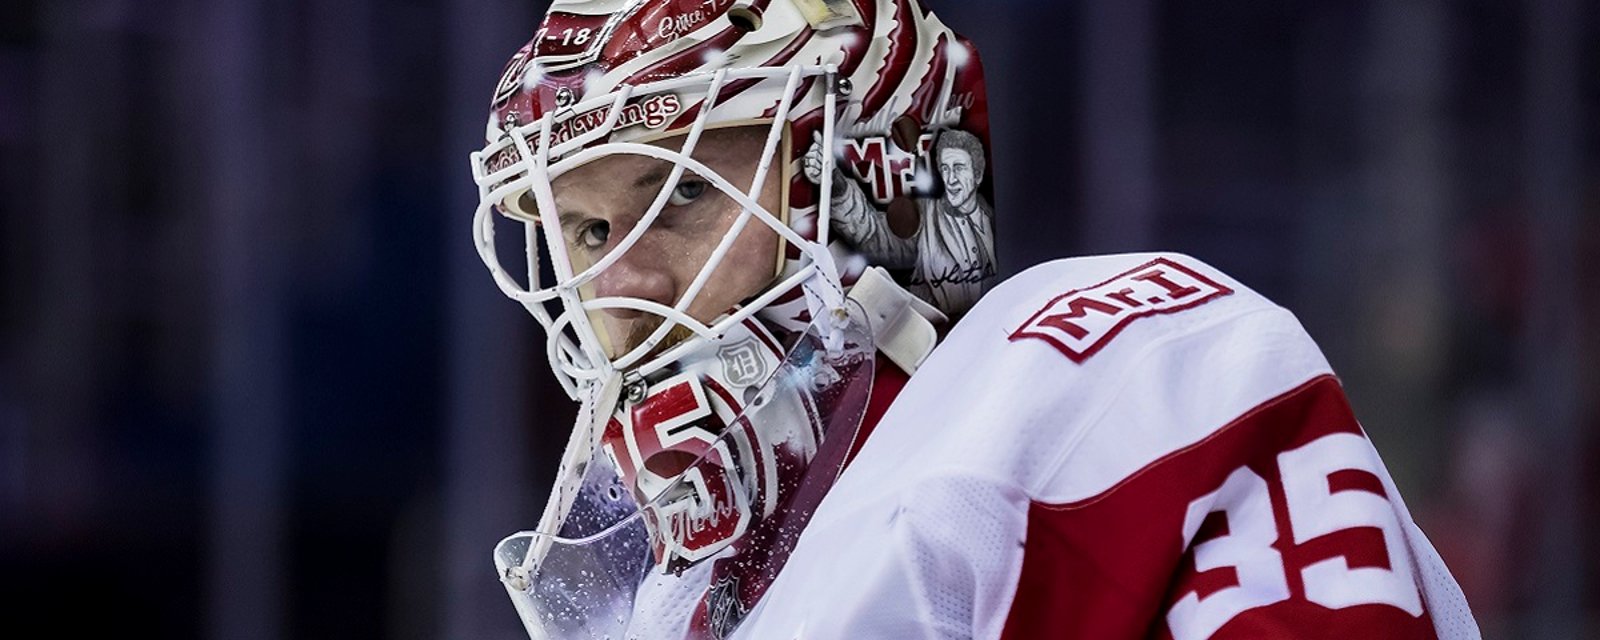 Jimmy Howard comments on the possibility of being traded for the first time in his career.